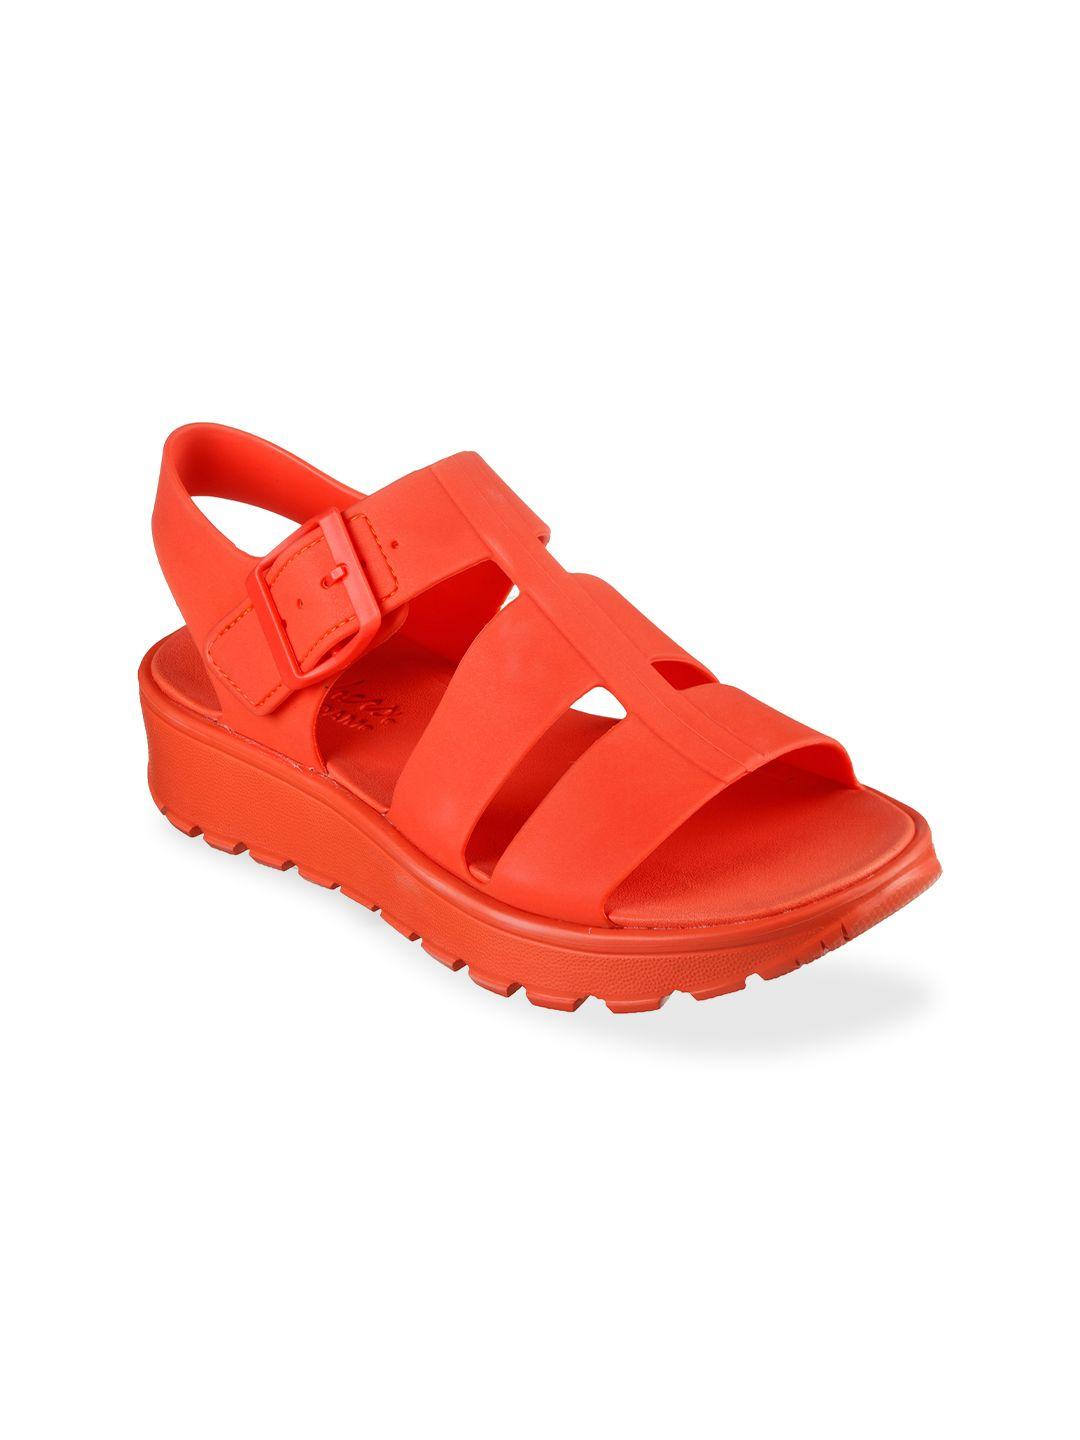 skechers-women-red-solid-buckled-sports-sandals